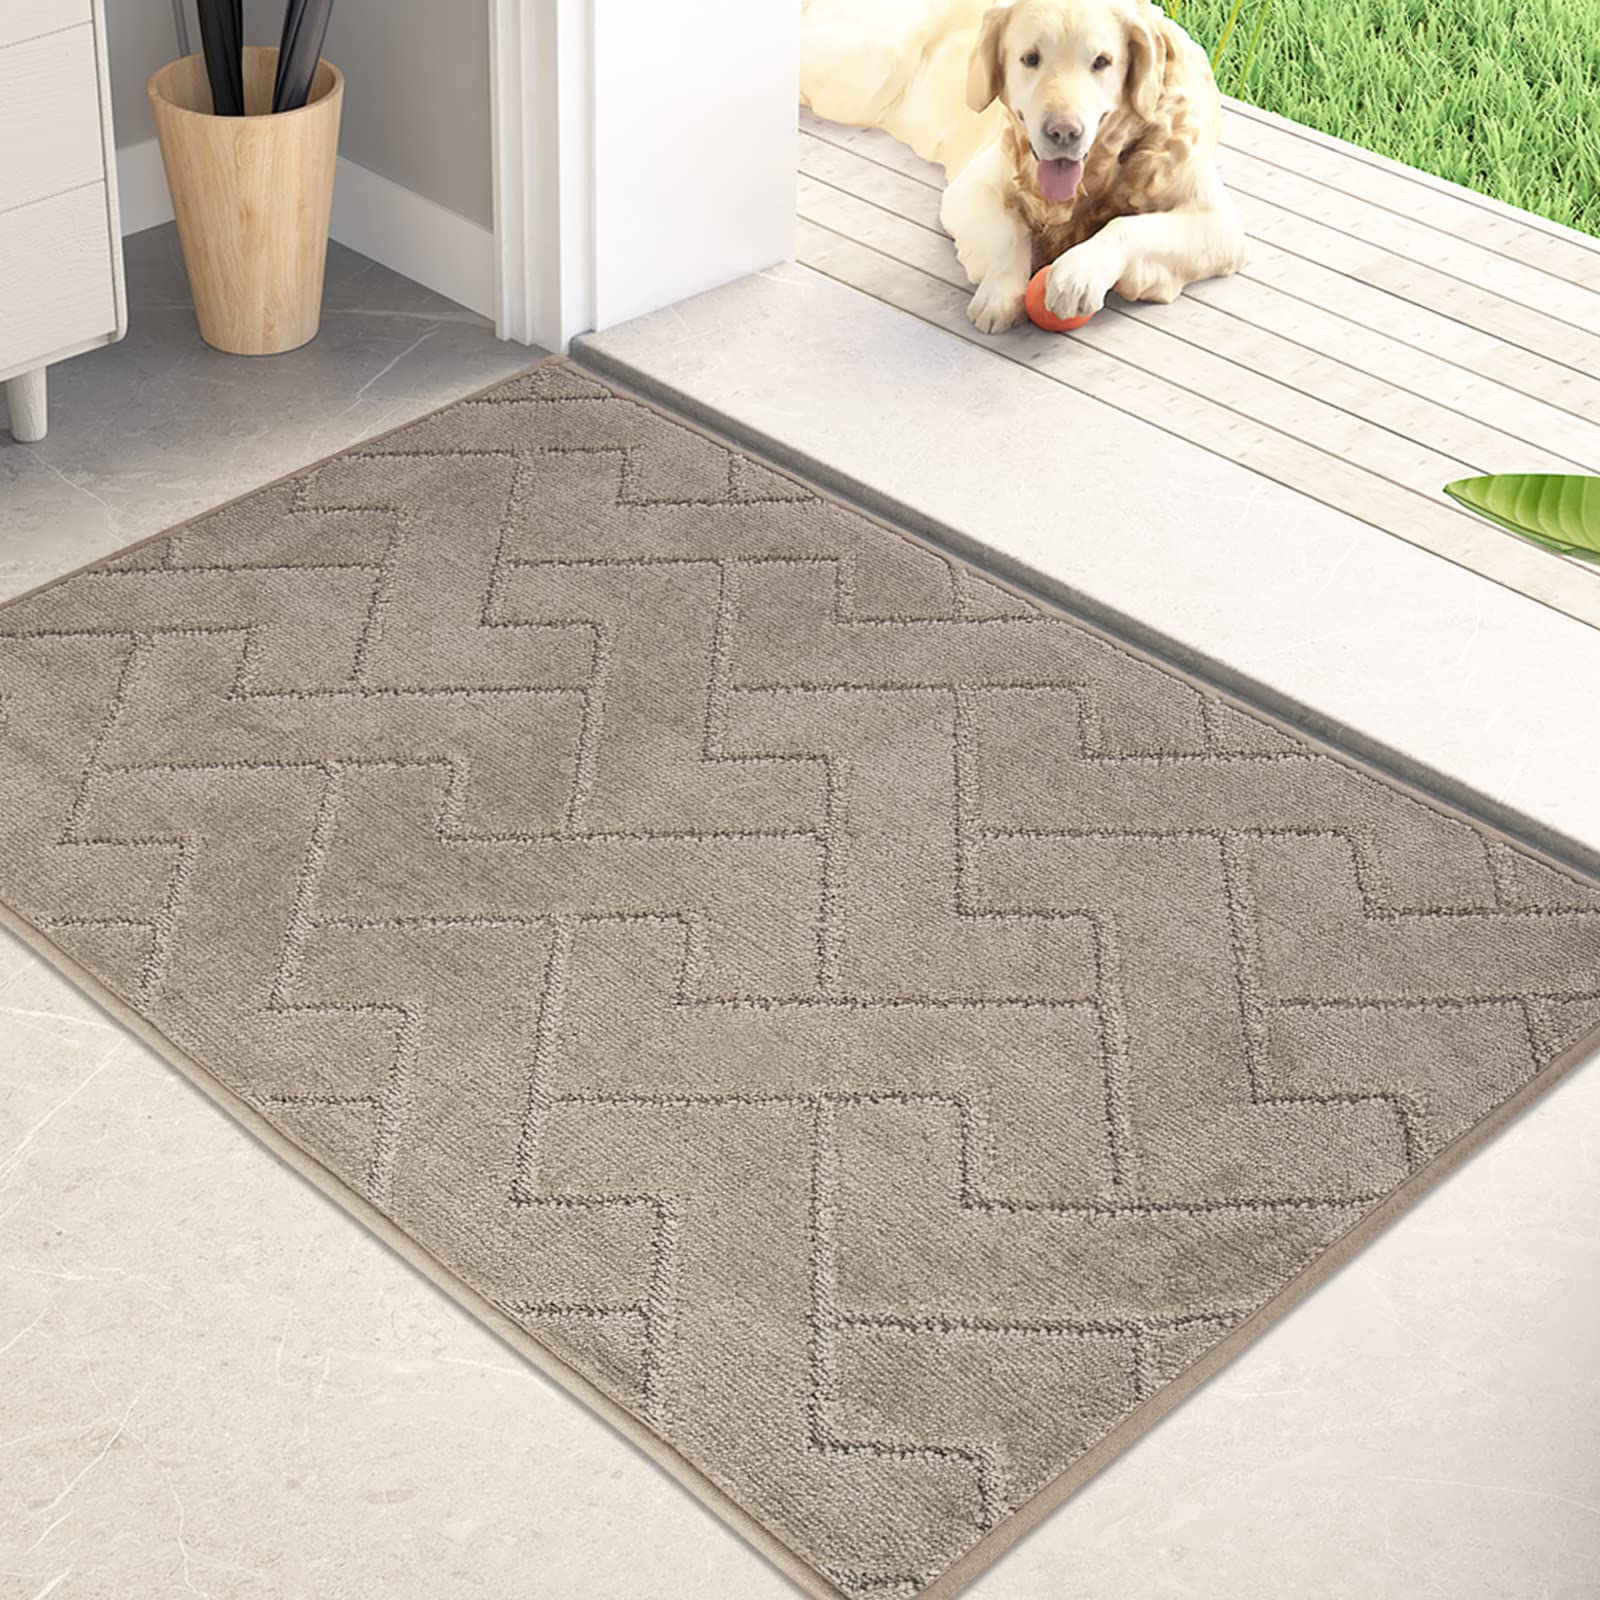 PURRUGS 20"x31.5" Non-Slip Washable Door Mat, Super Absorbent Entry Rug for Muddy Shoes & Wet Paws